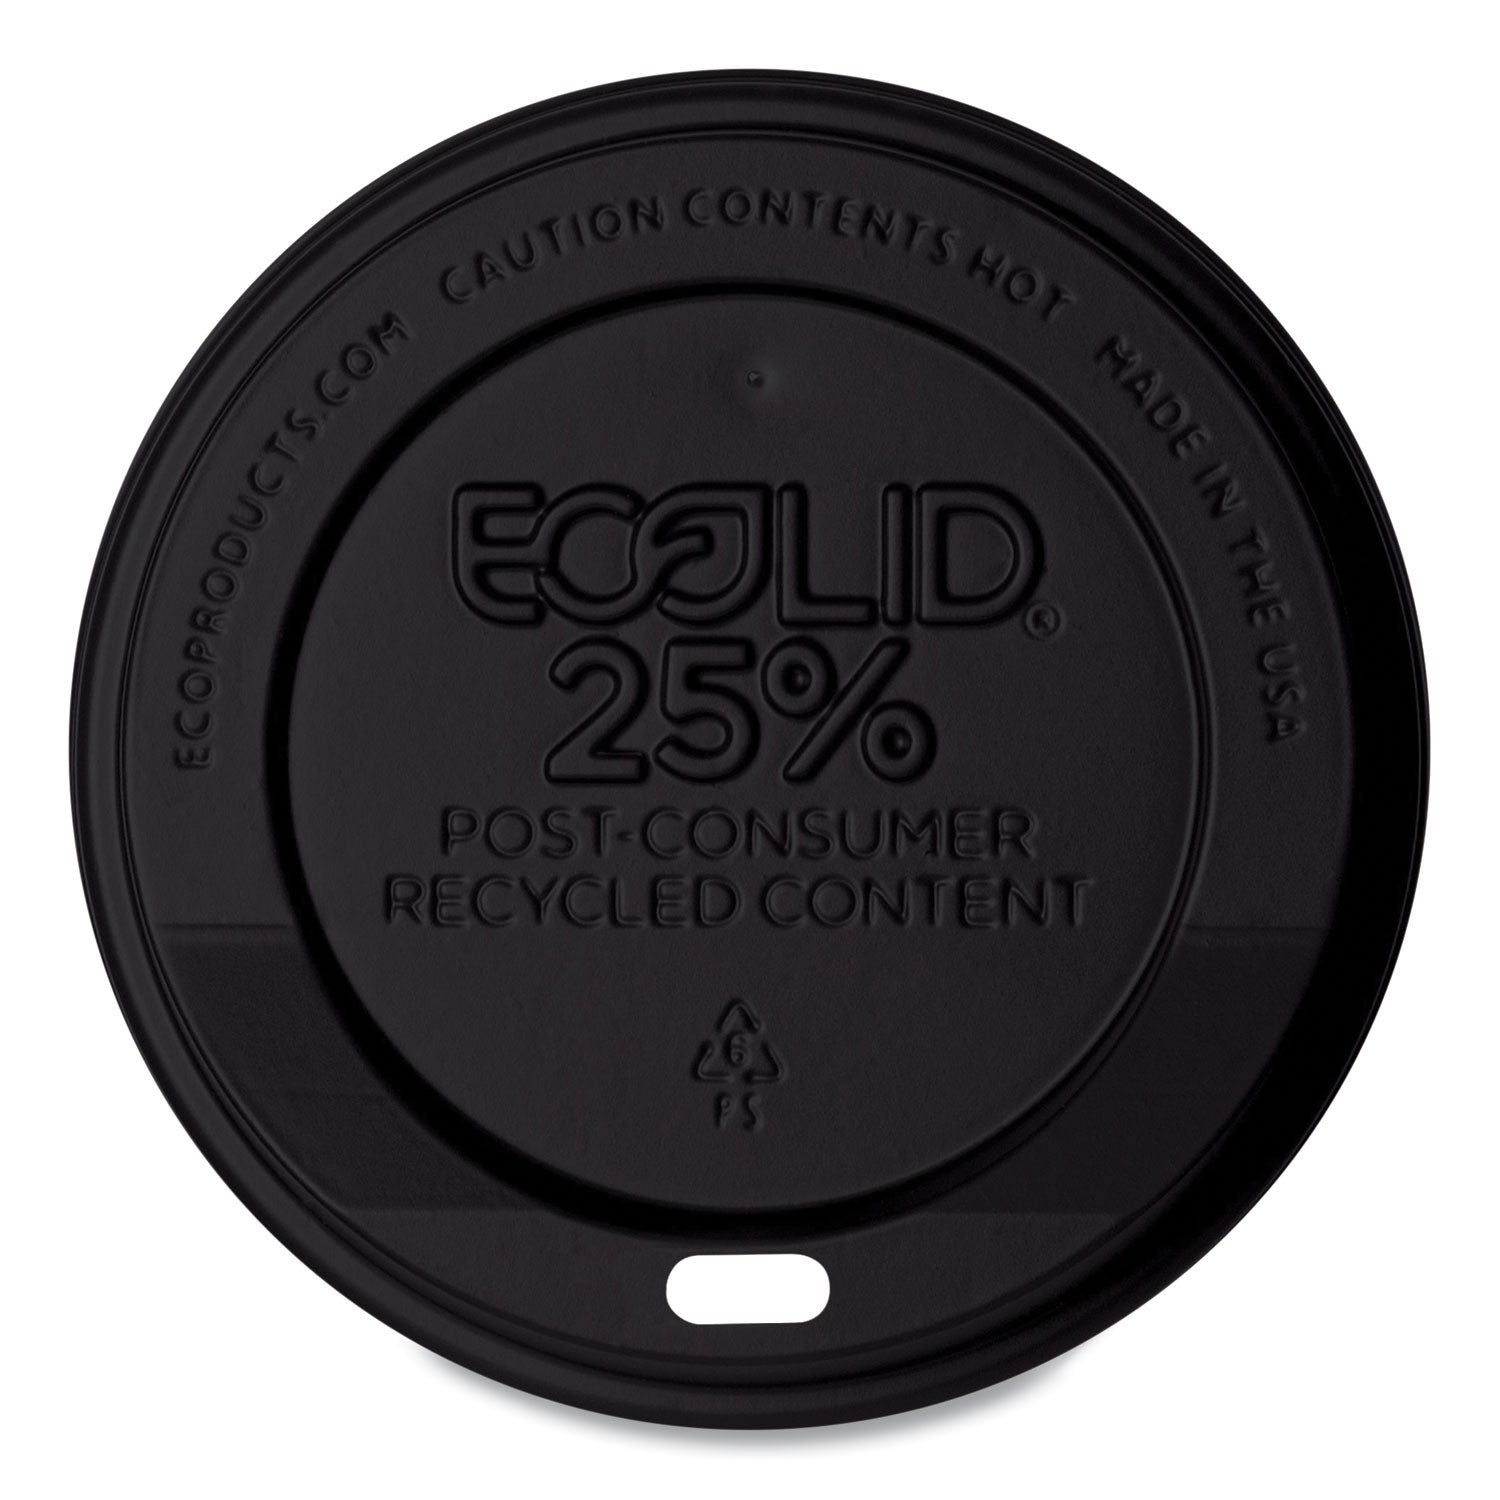 ecolid-25%-recycled-content-hot-cup-lid-black-fits-10-oz-to-20-oz-cups-100-pack-10-packs-carton_ecoephl16br - 2